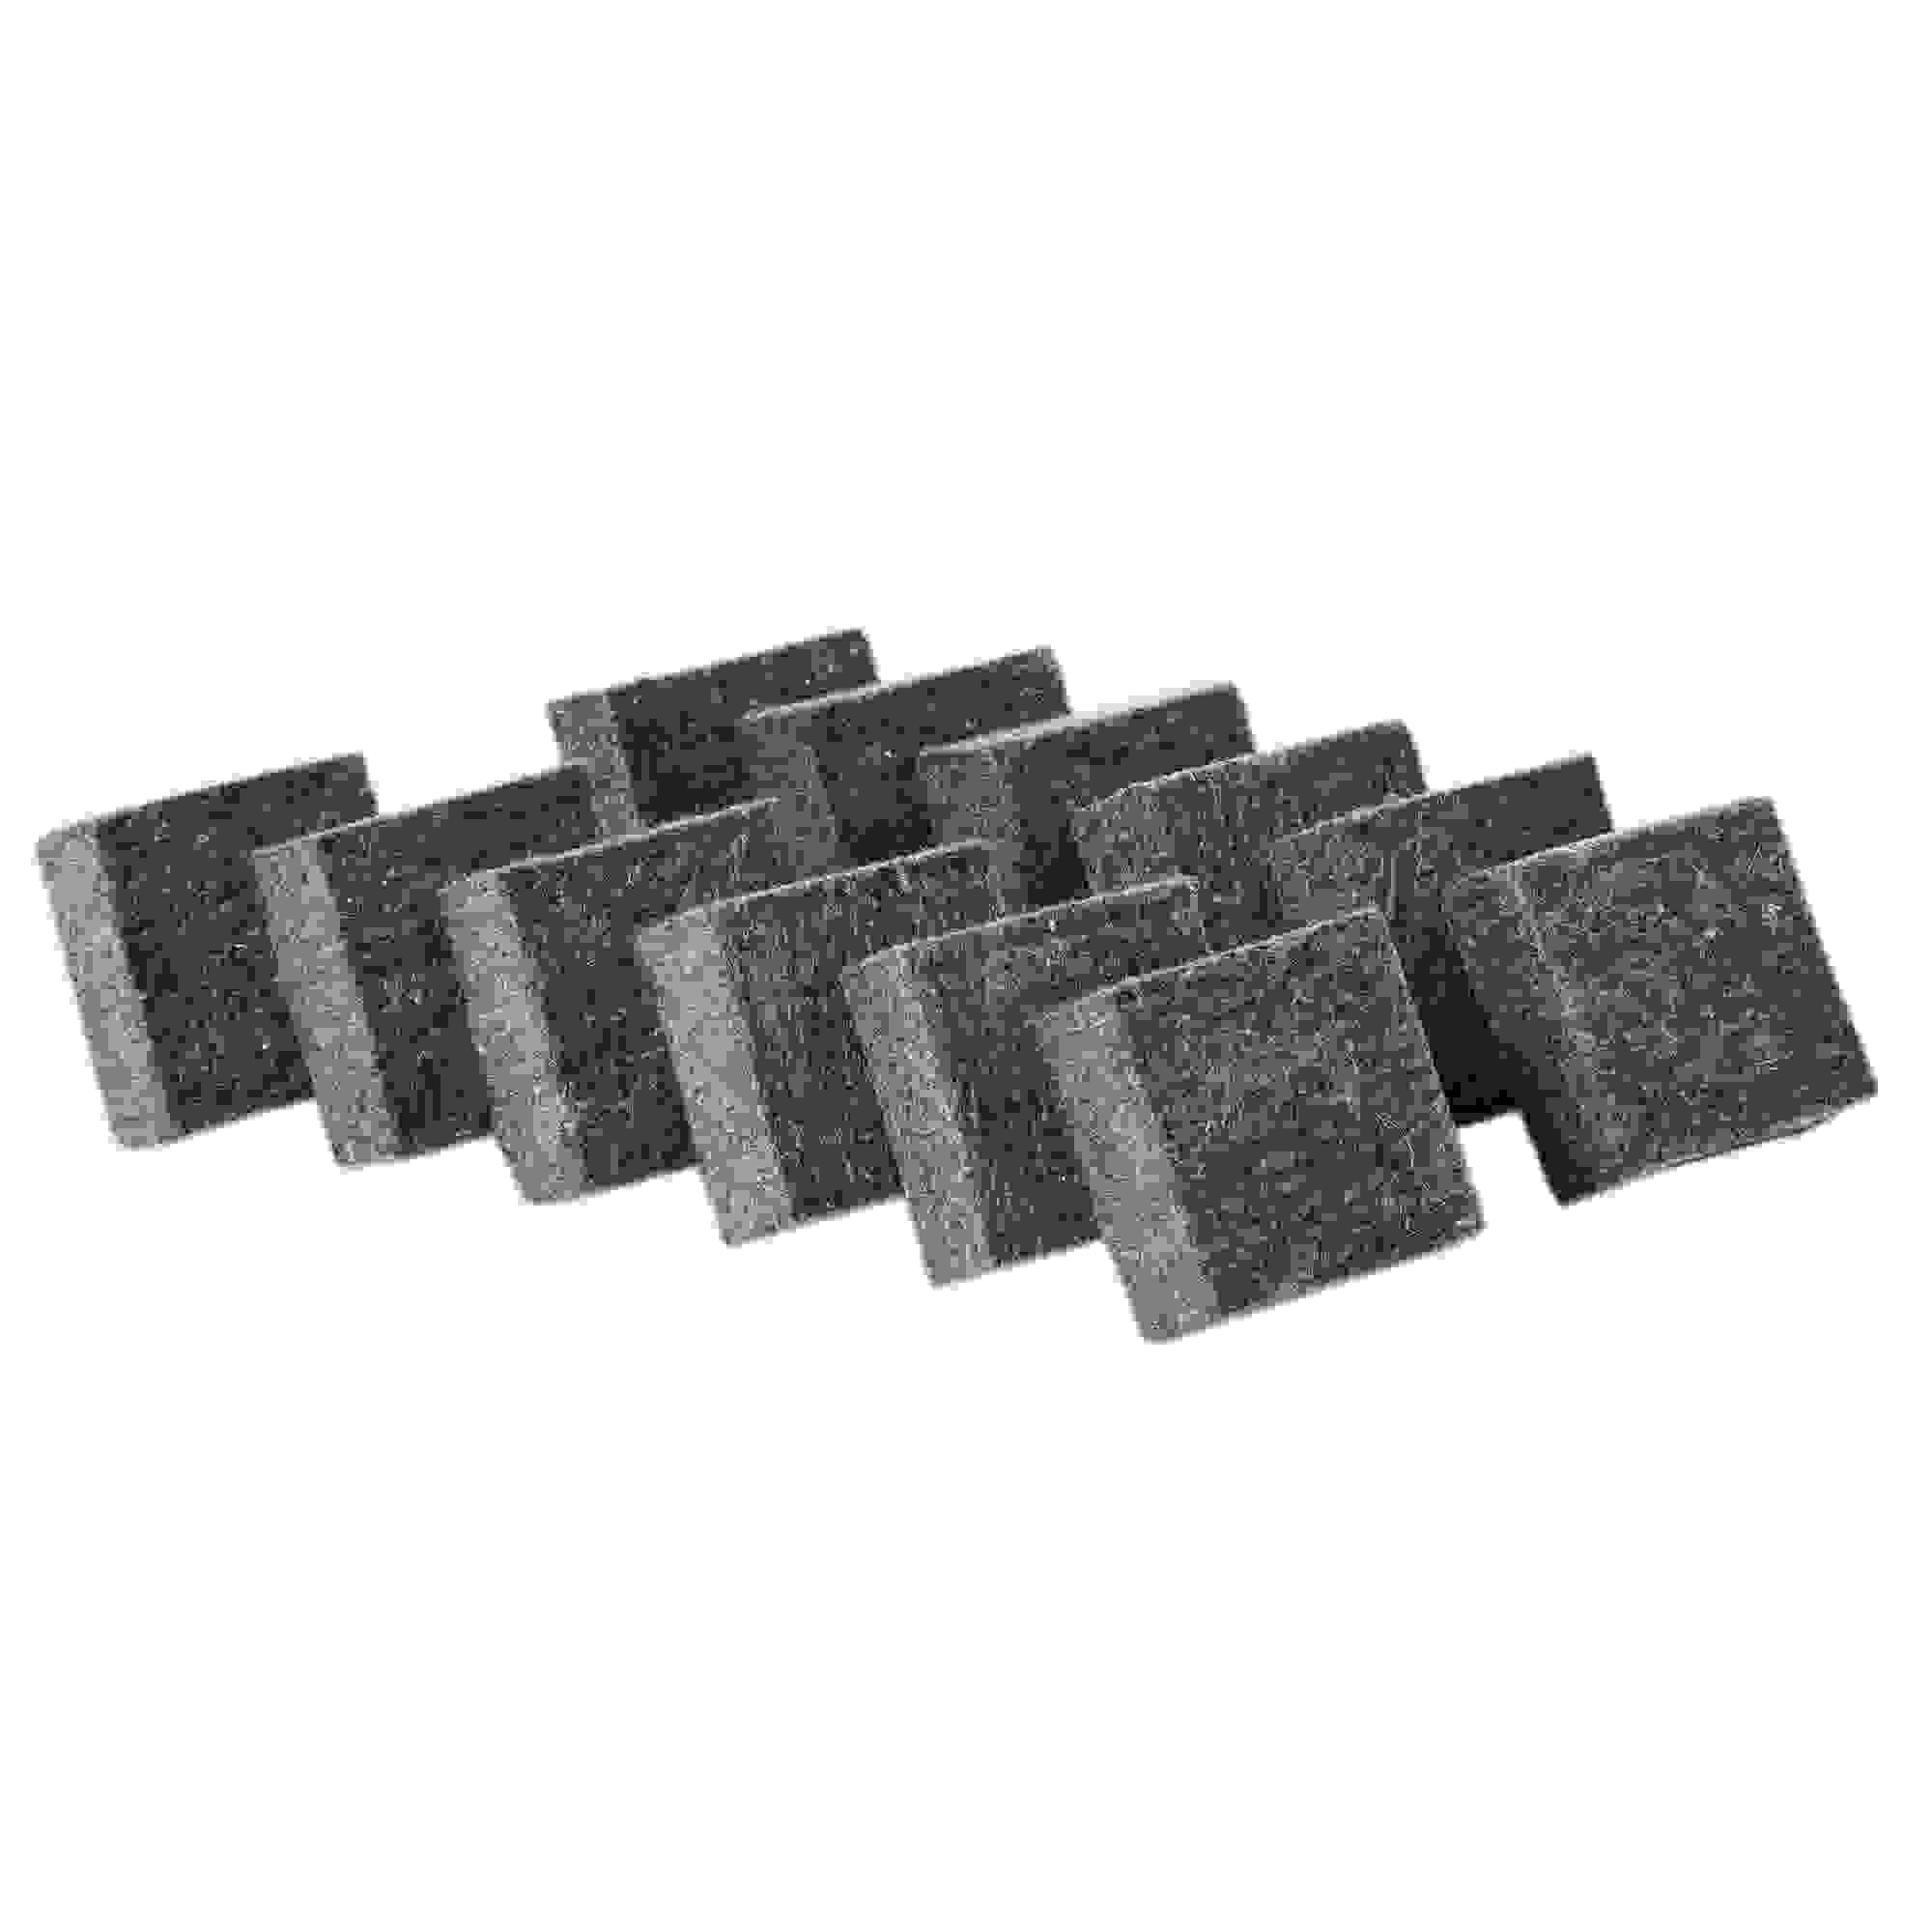 Multi-Purpose Felt Erasers, 2" x 2", Charcoal, Pack of 12